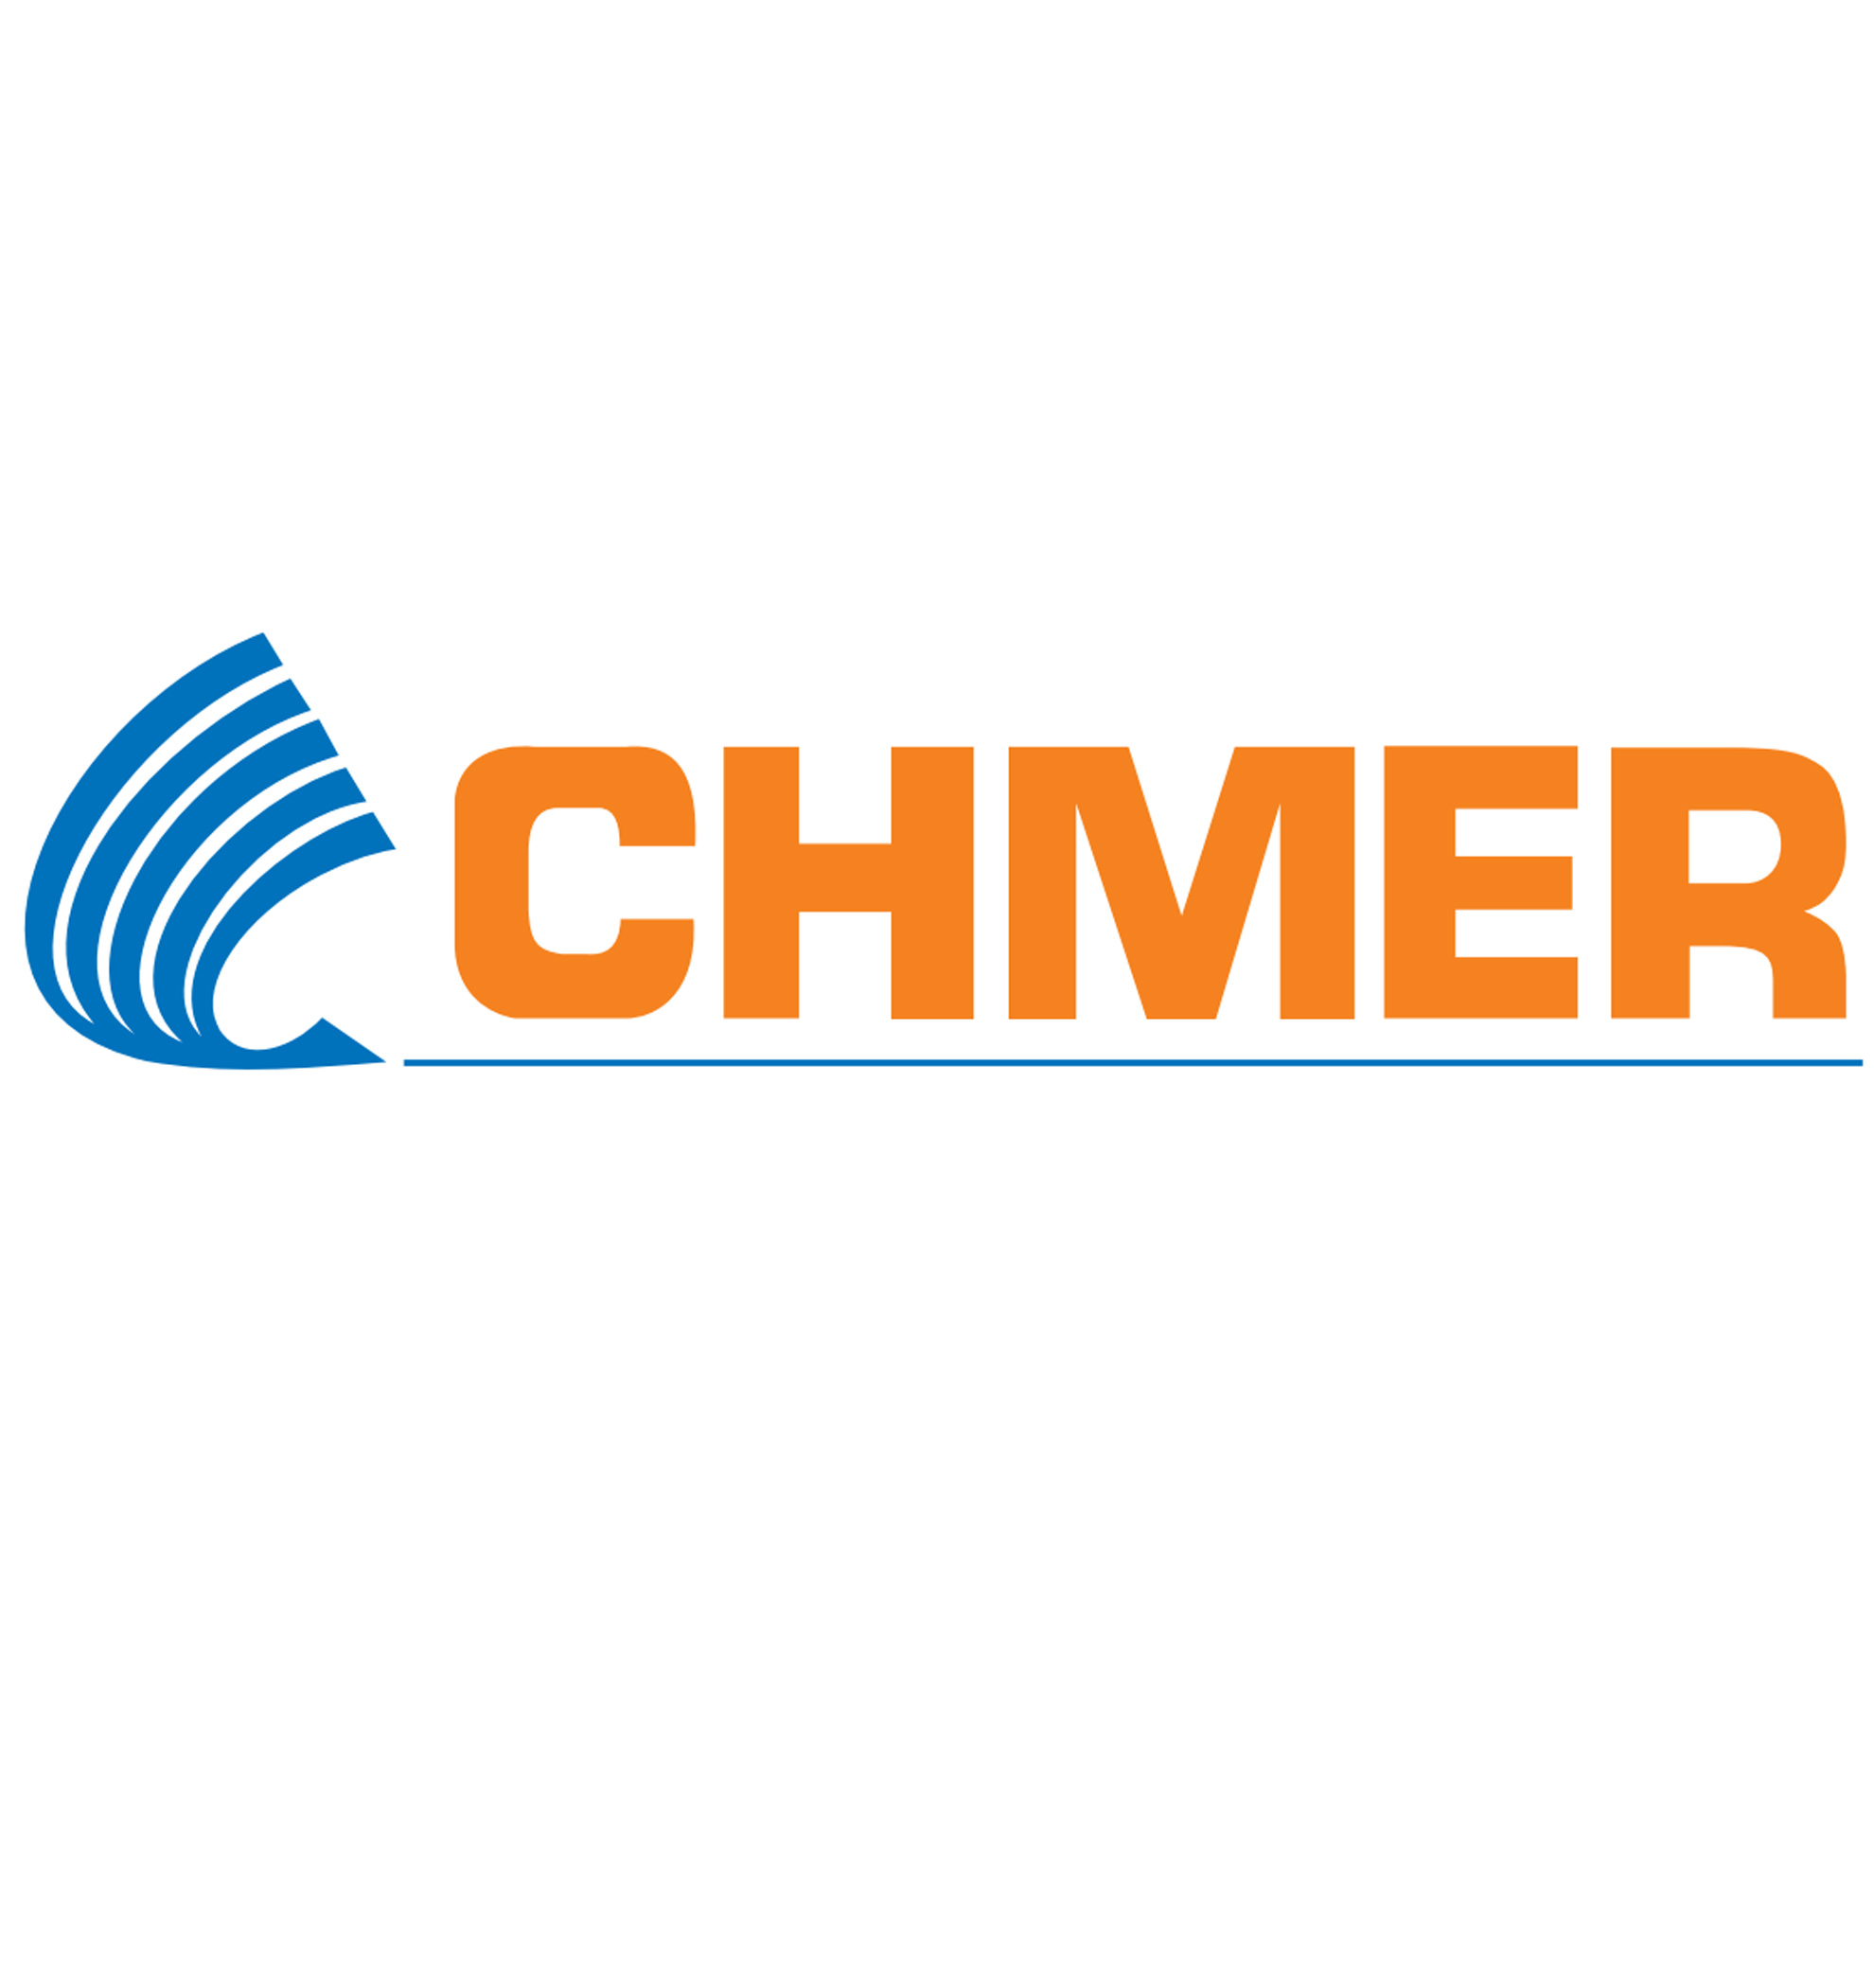 CHMER product catalog